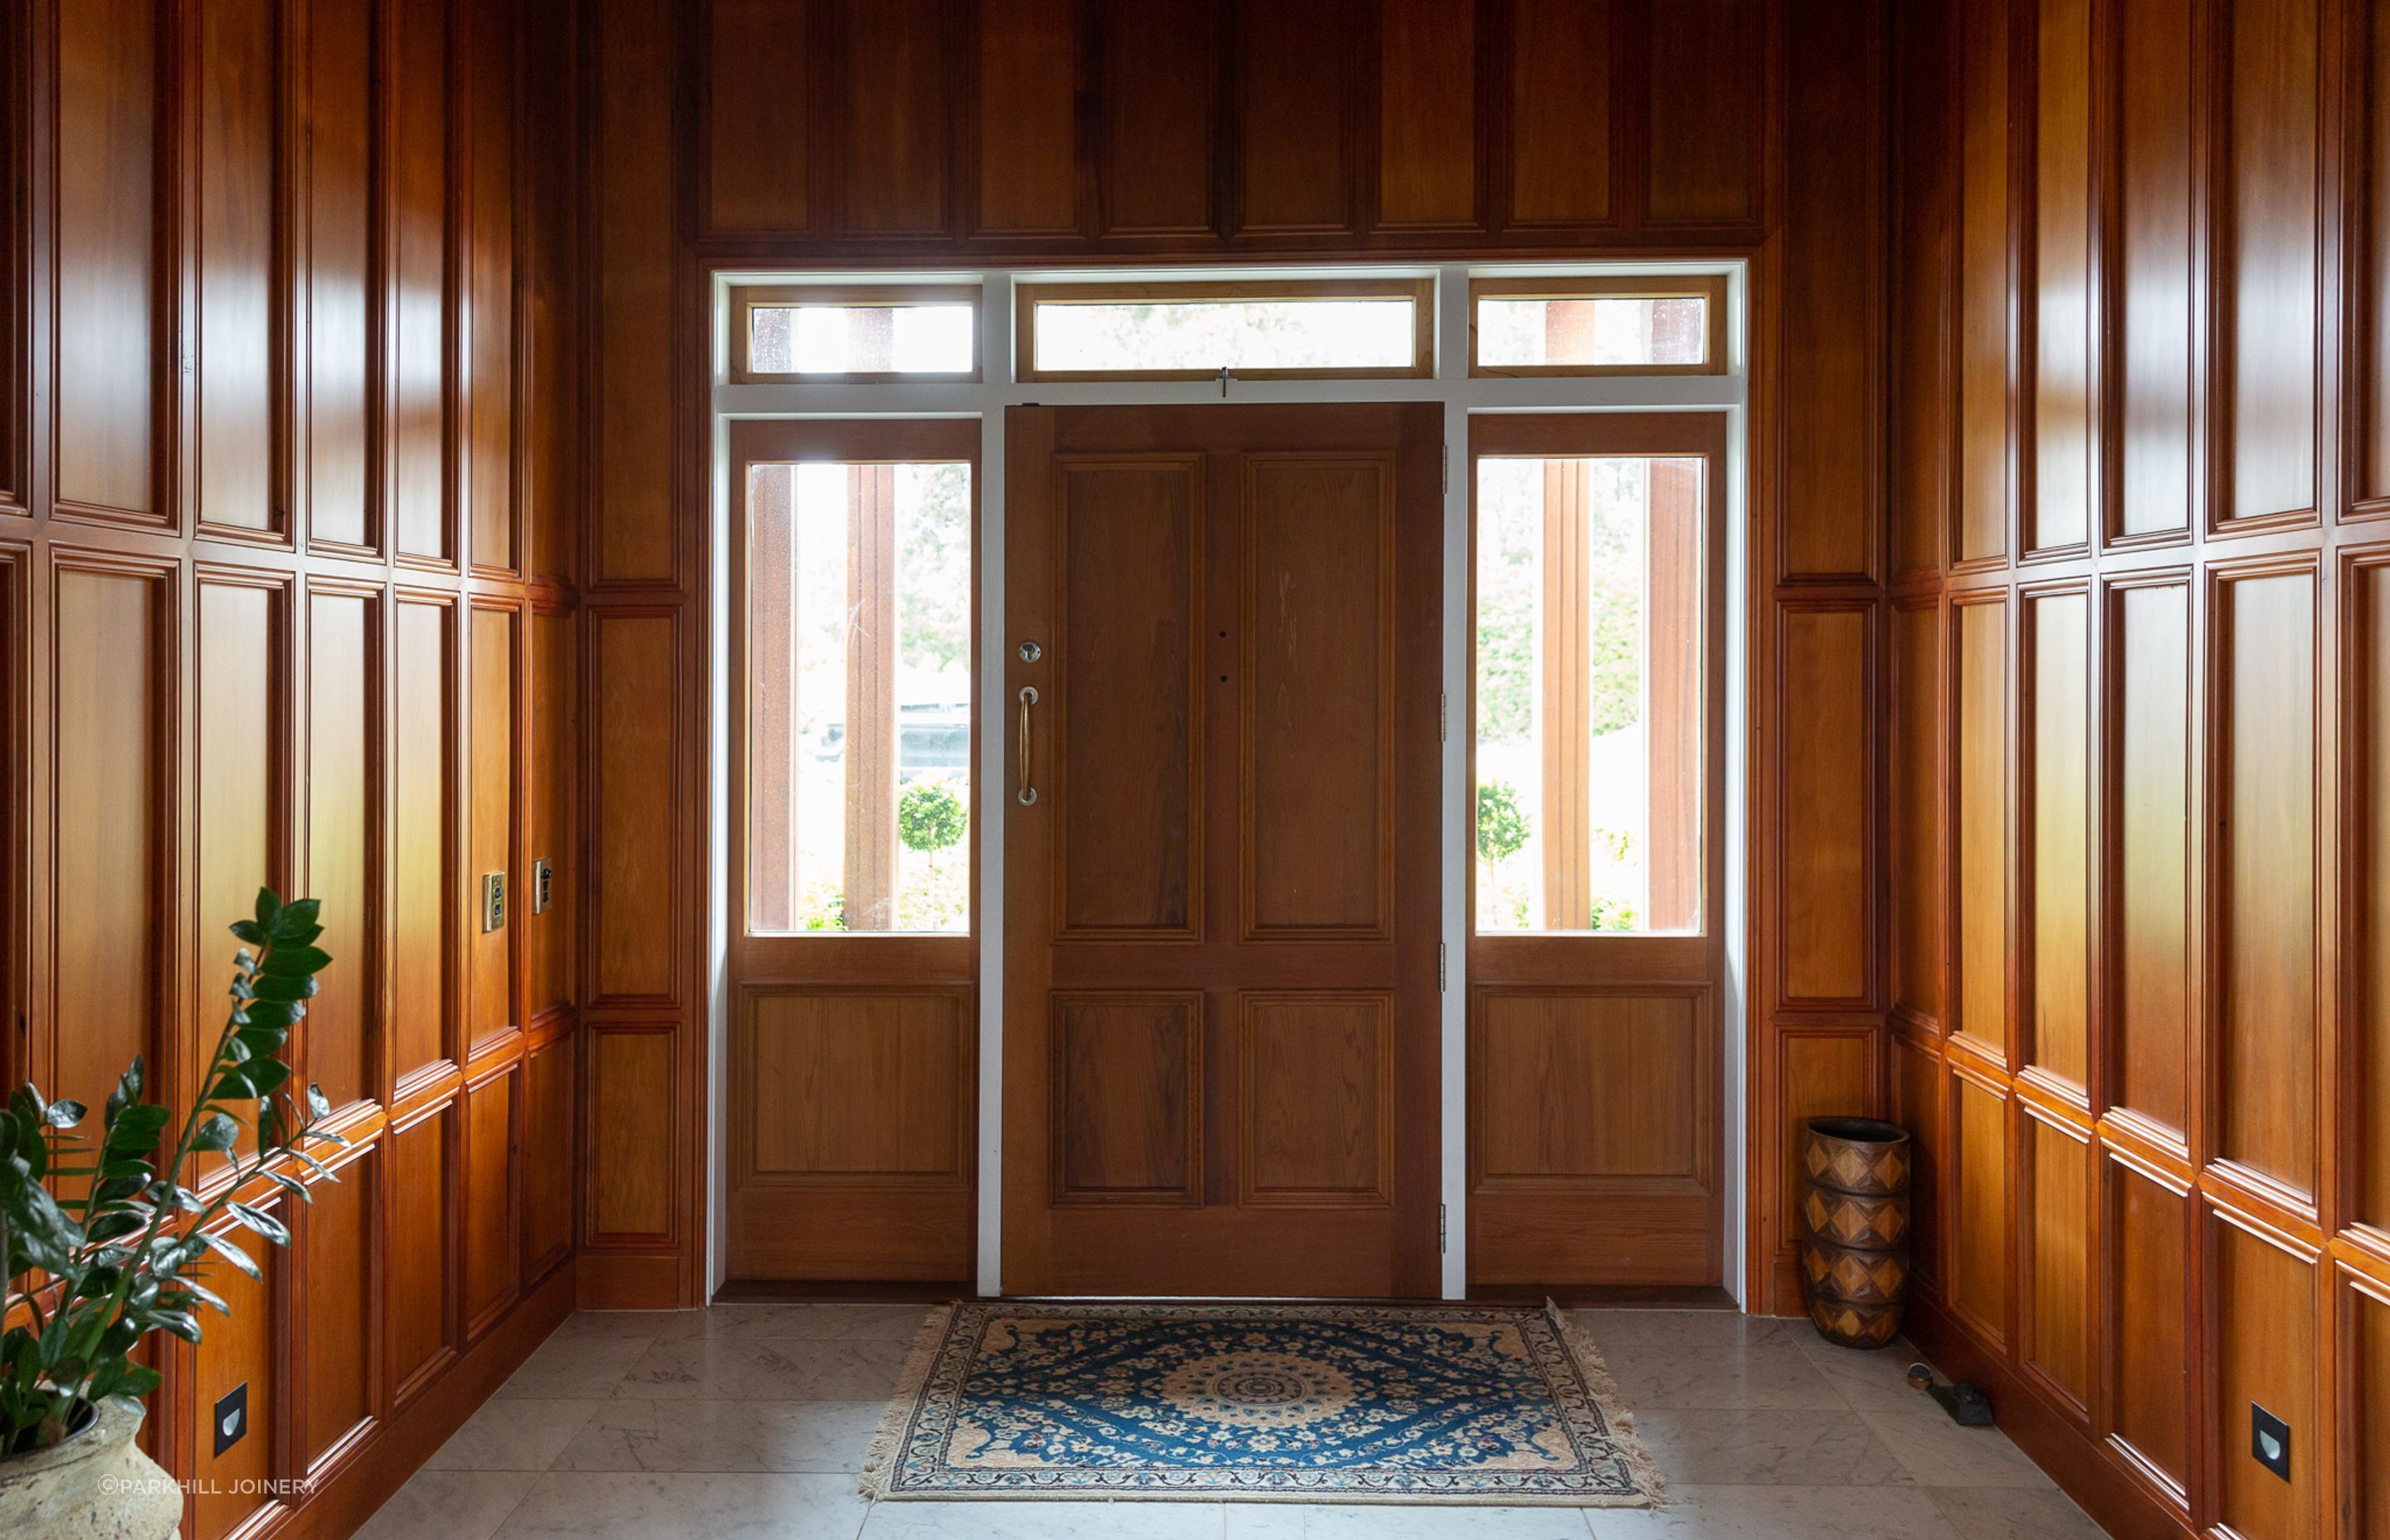 Custom jarra wood panelling makes a statement to the entry.